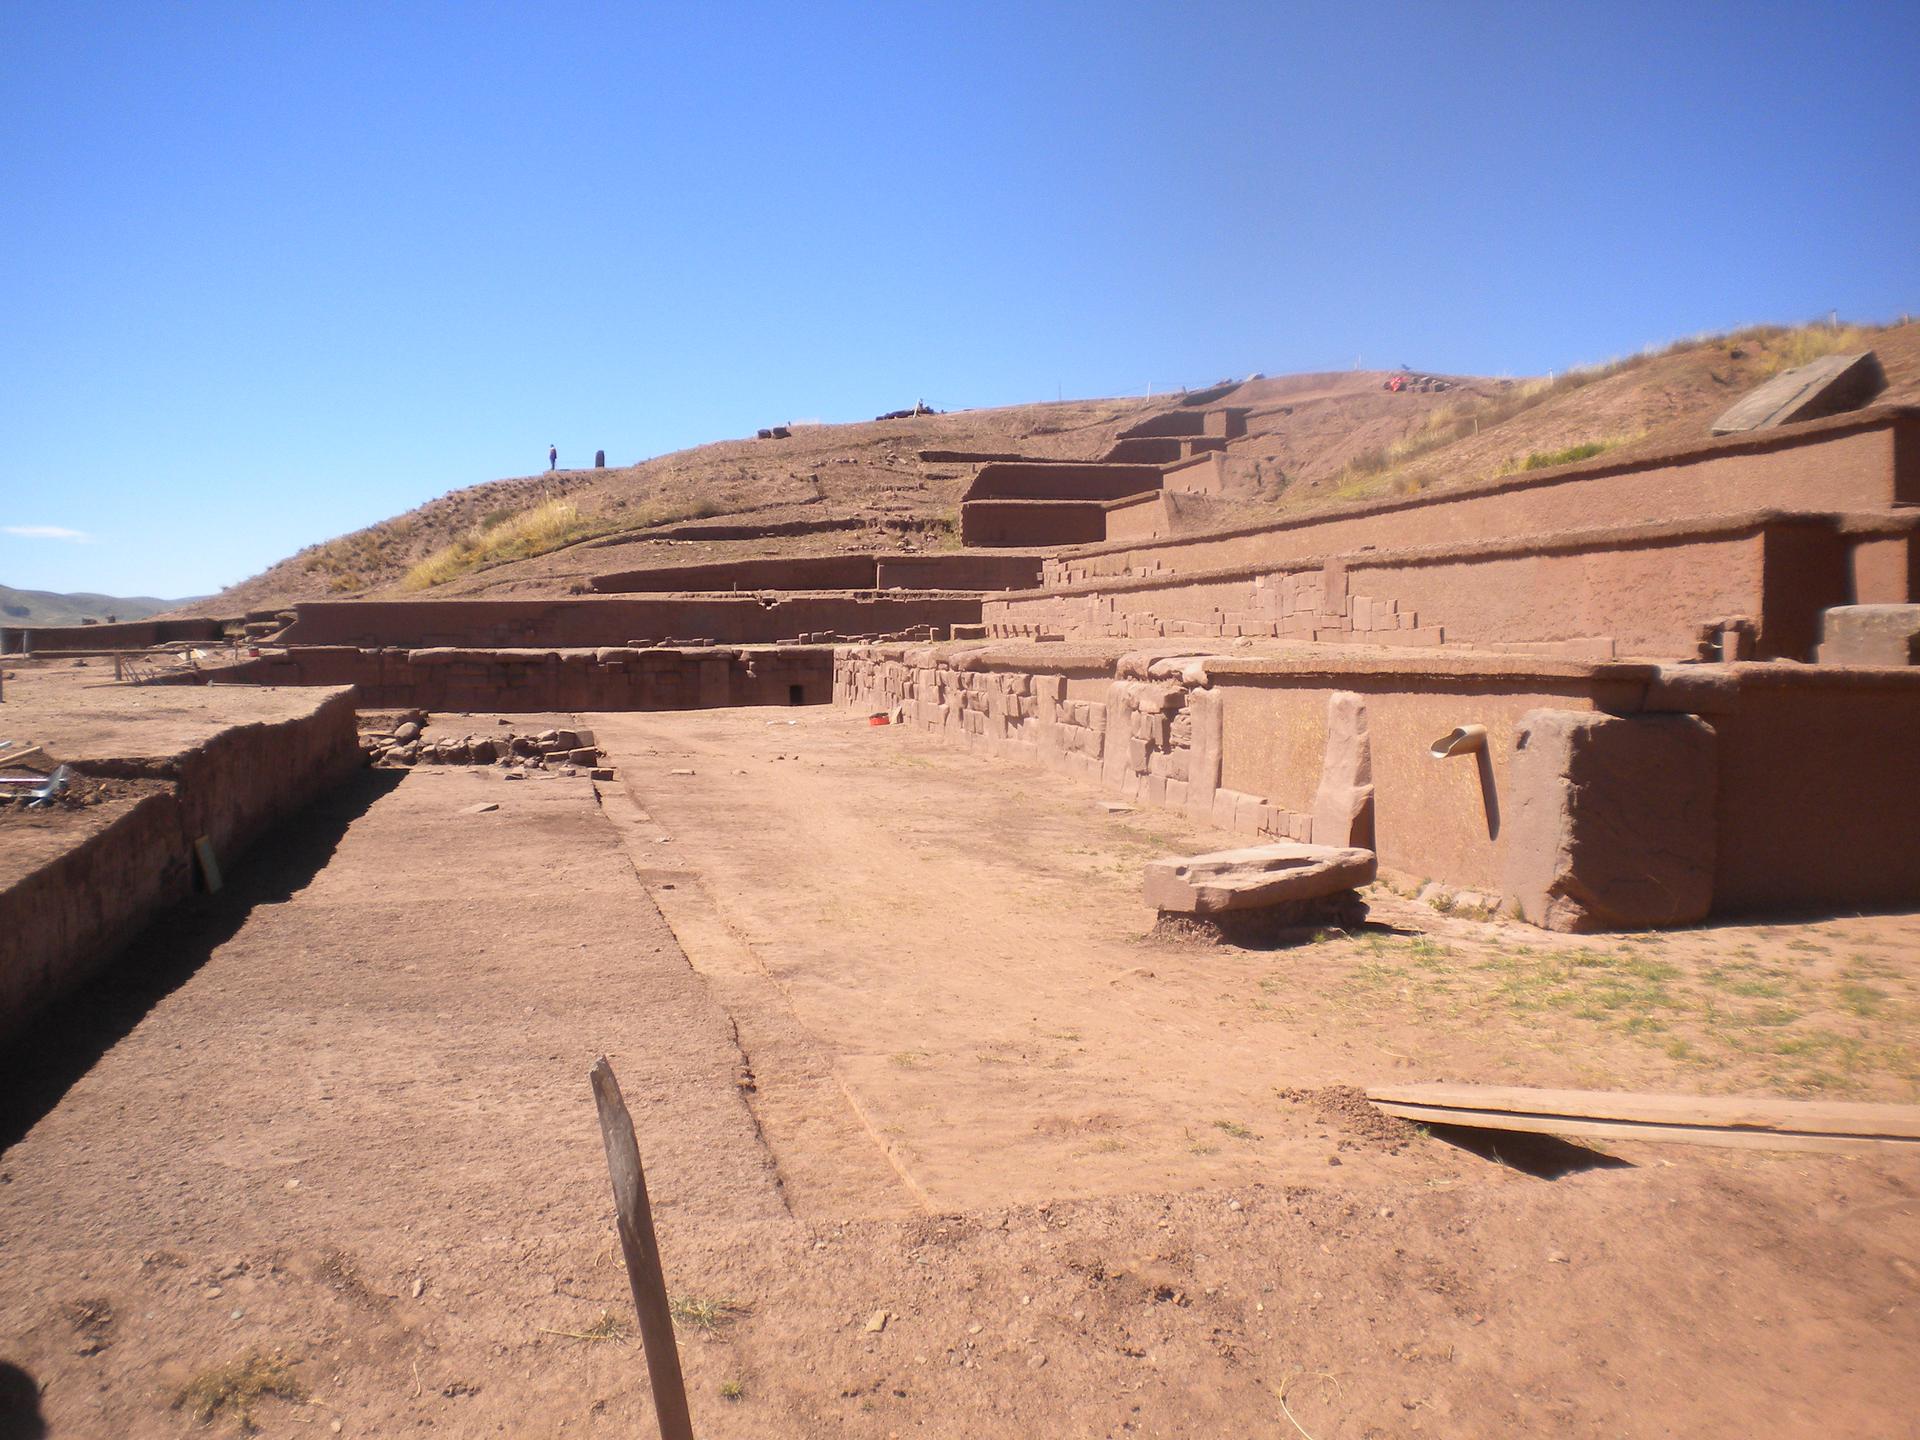 Some of the ruins at Tiwanaku in Bolivia, a UNESCO heritage site taken in 2010.